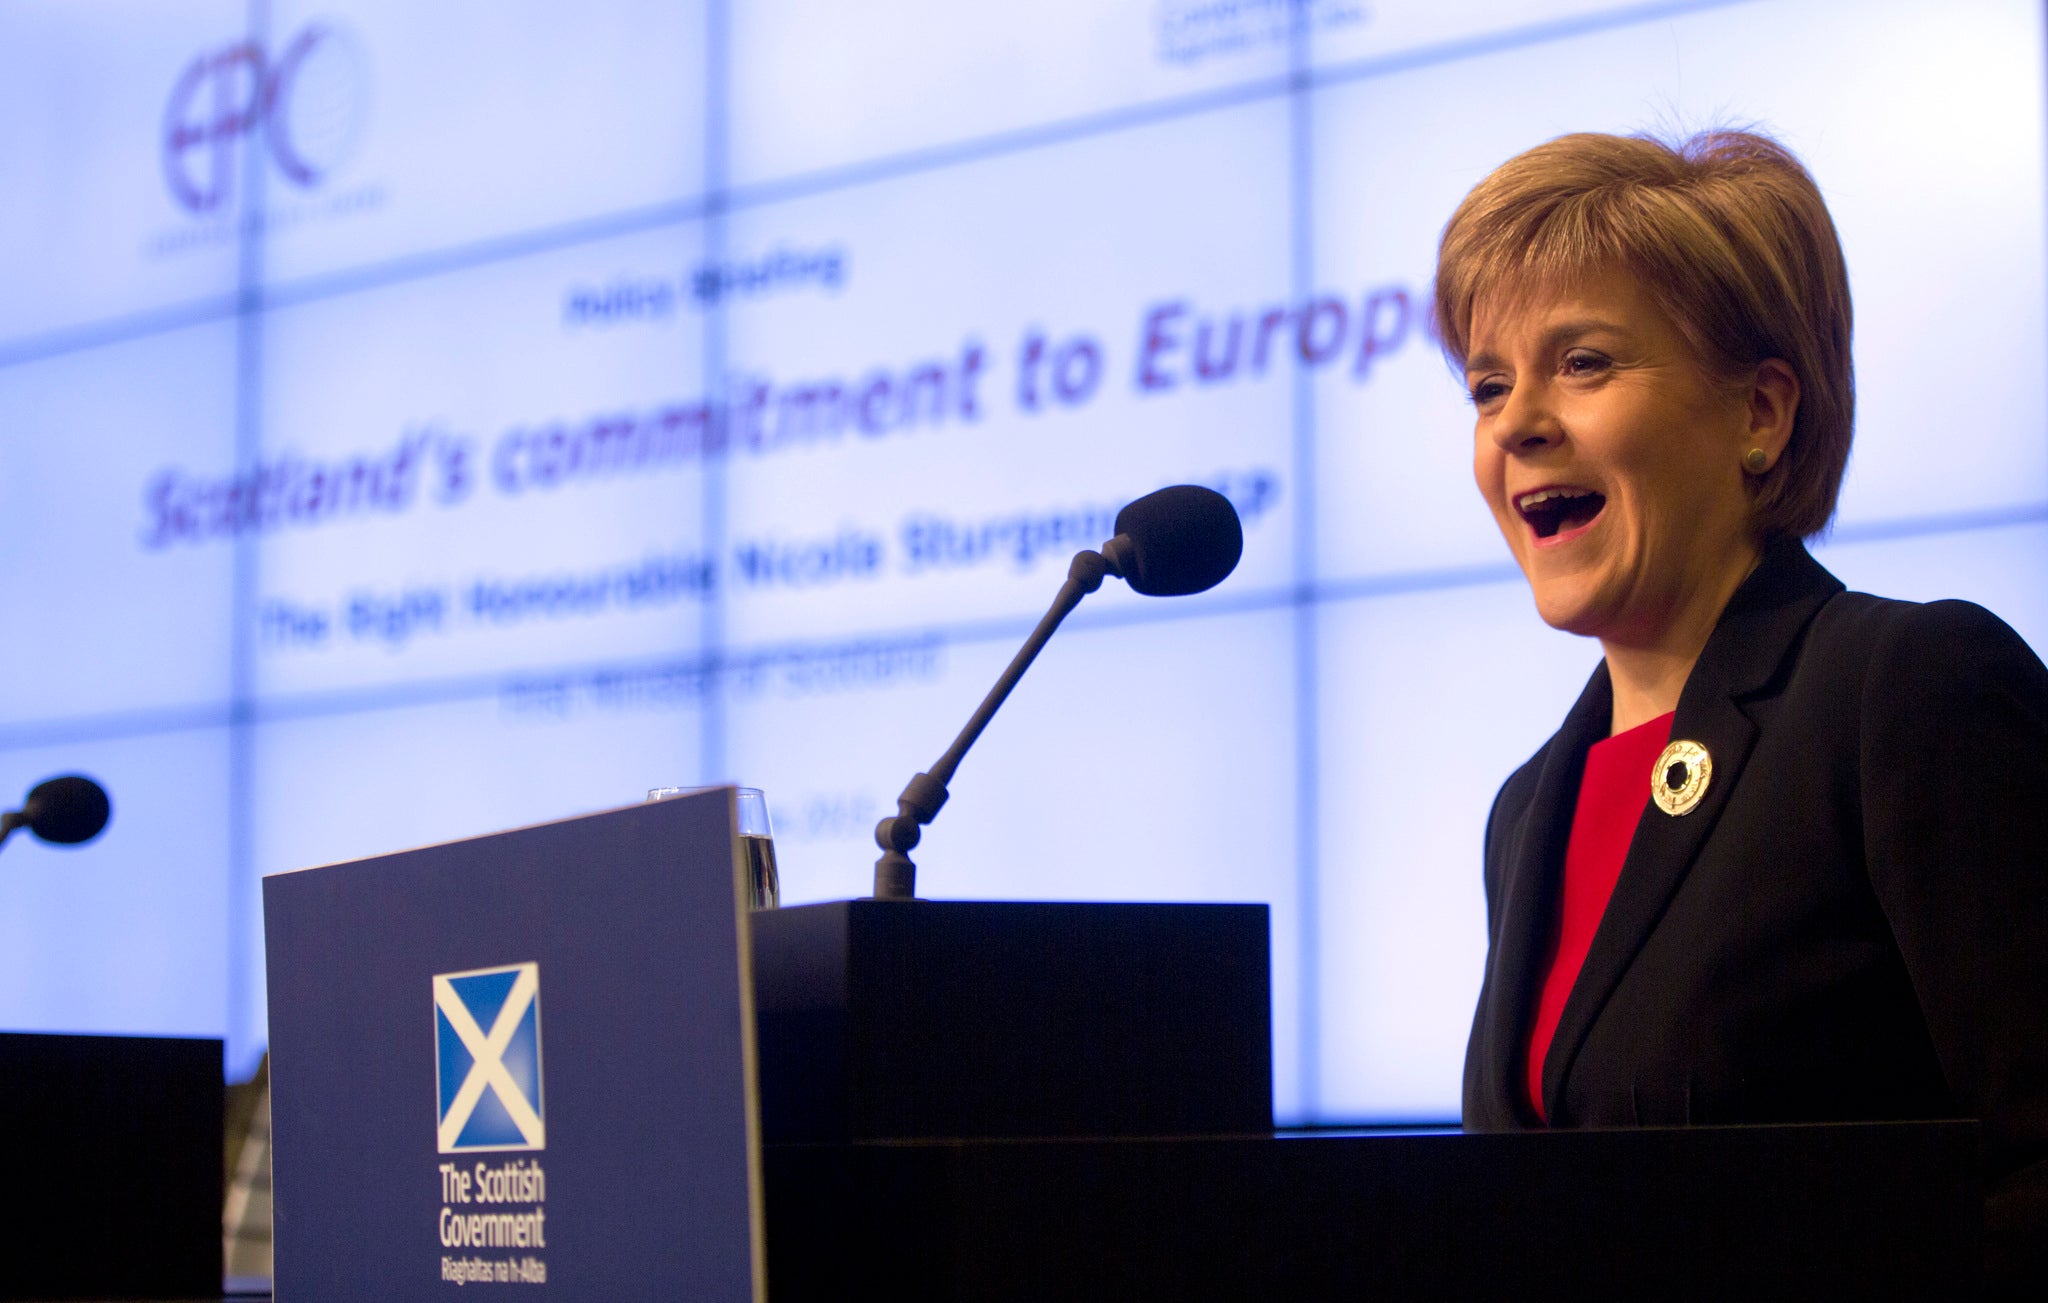 Nicola Sturgeon speaking in Brussels for the first time as First Minister of Scotland